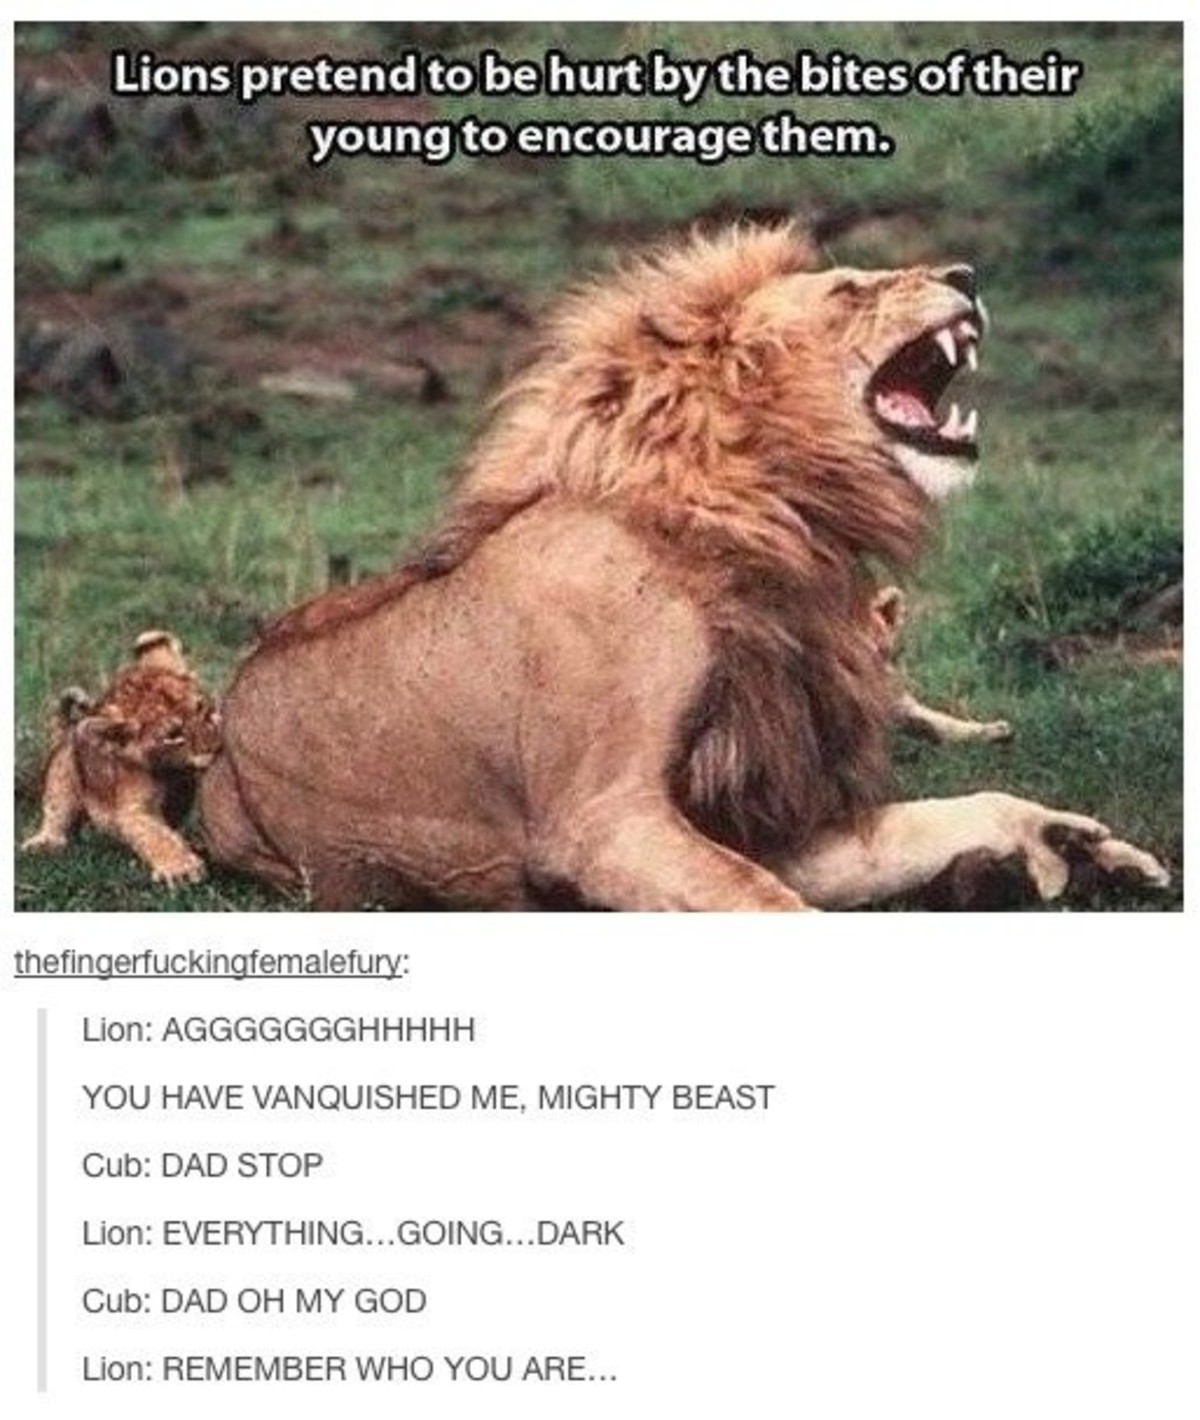 Aminals 4. . Lions pretend to be hurt by the bites of their young to encourage them. YOU HAVE VANQUISHED ME, MIGHTY BEAST Cub: DAD STOP Cub: DAD '' MY GOD Lion: